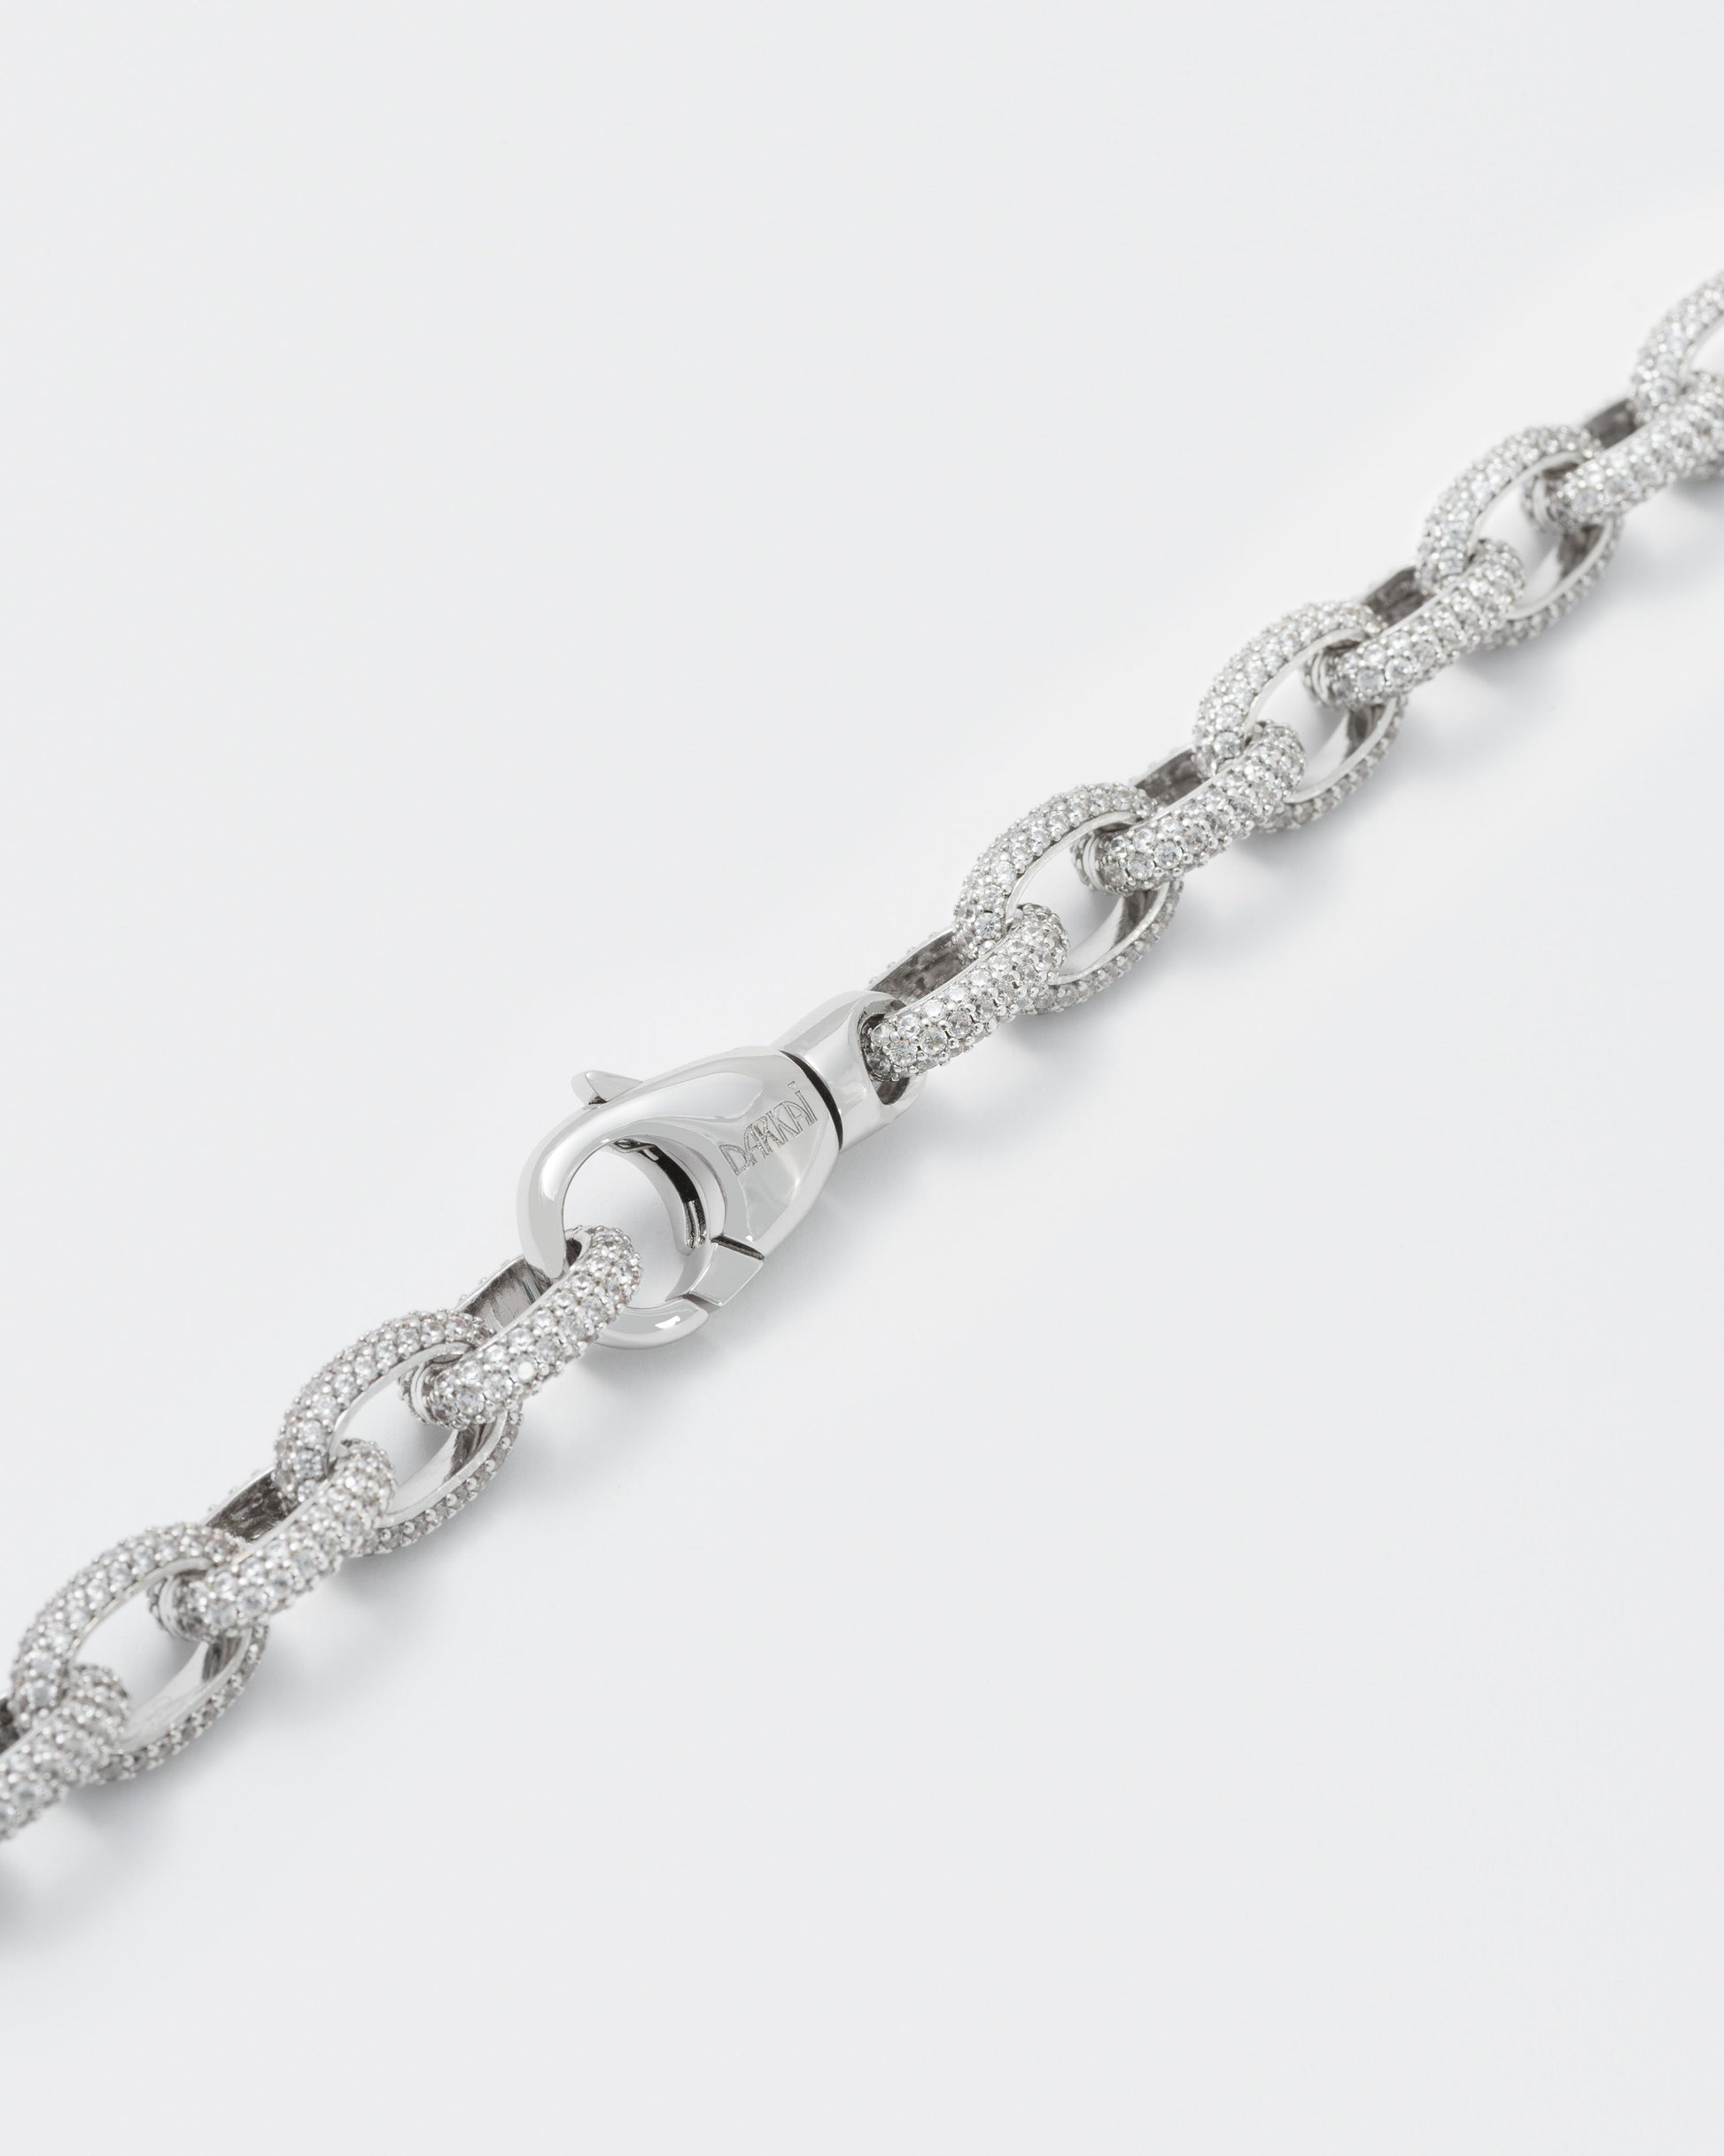 detail of 18k white gold coated rolo chain bracelet with all-around hand-set micropavé stones